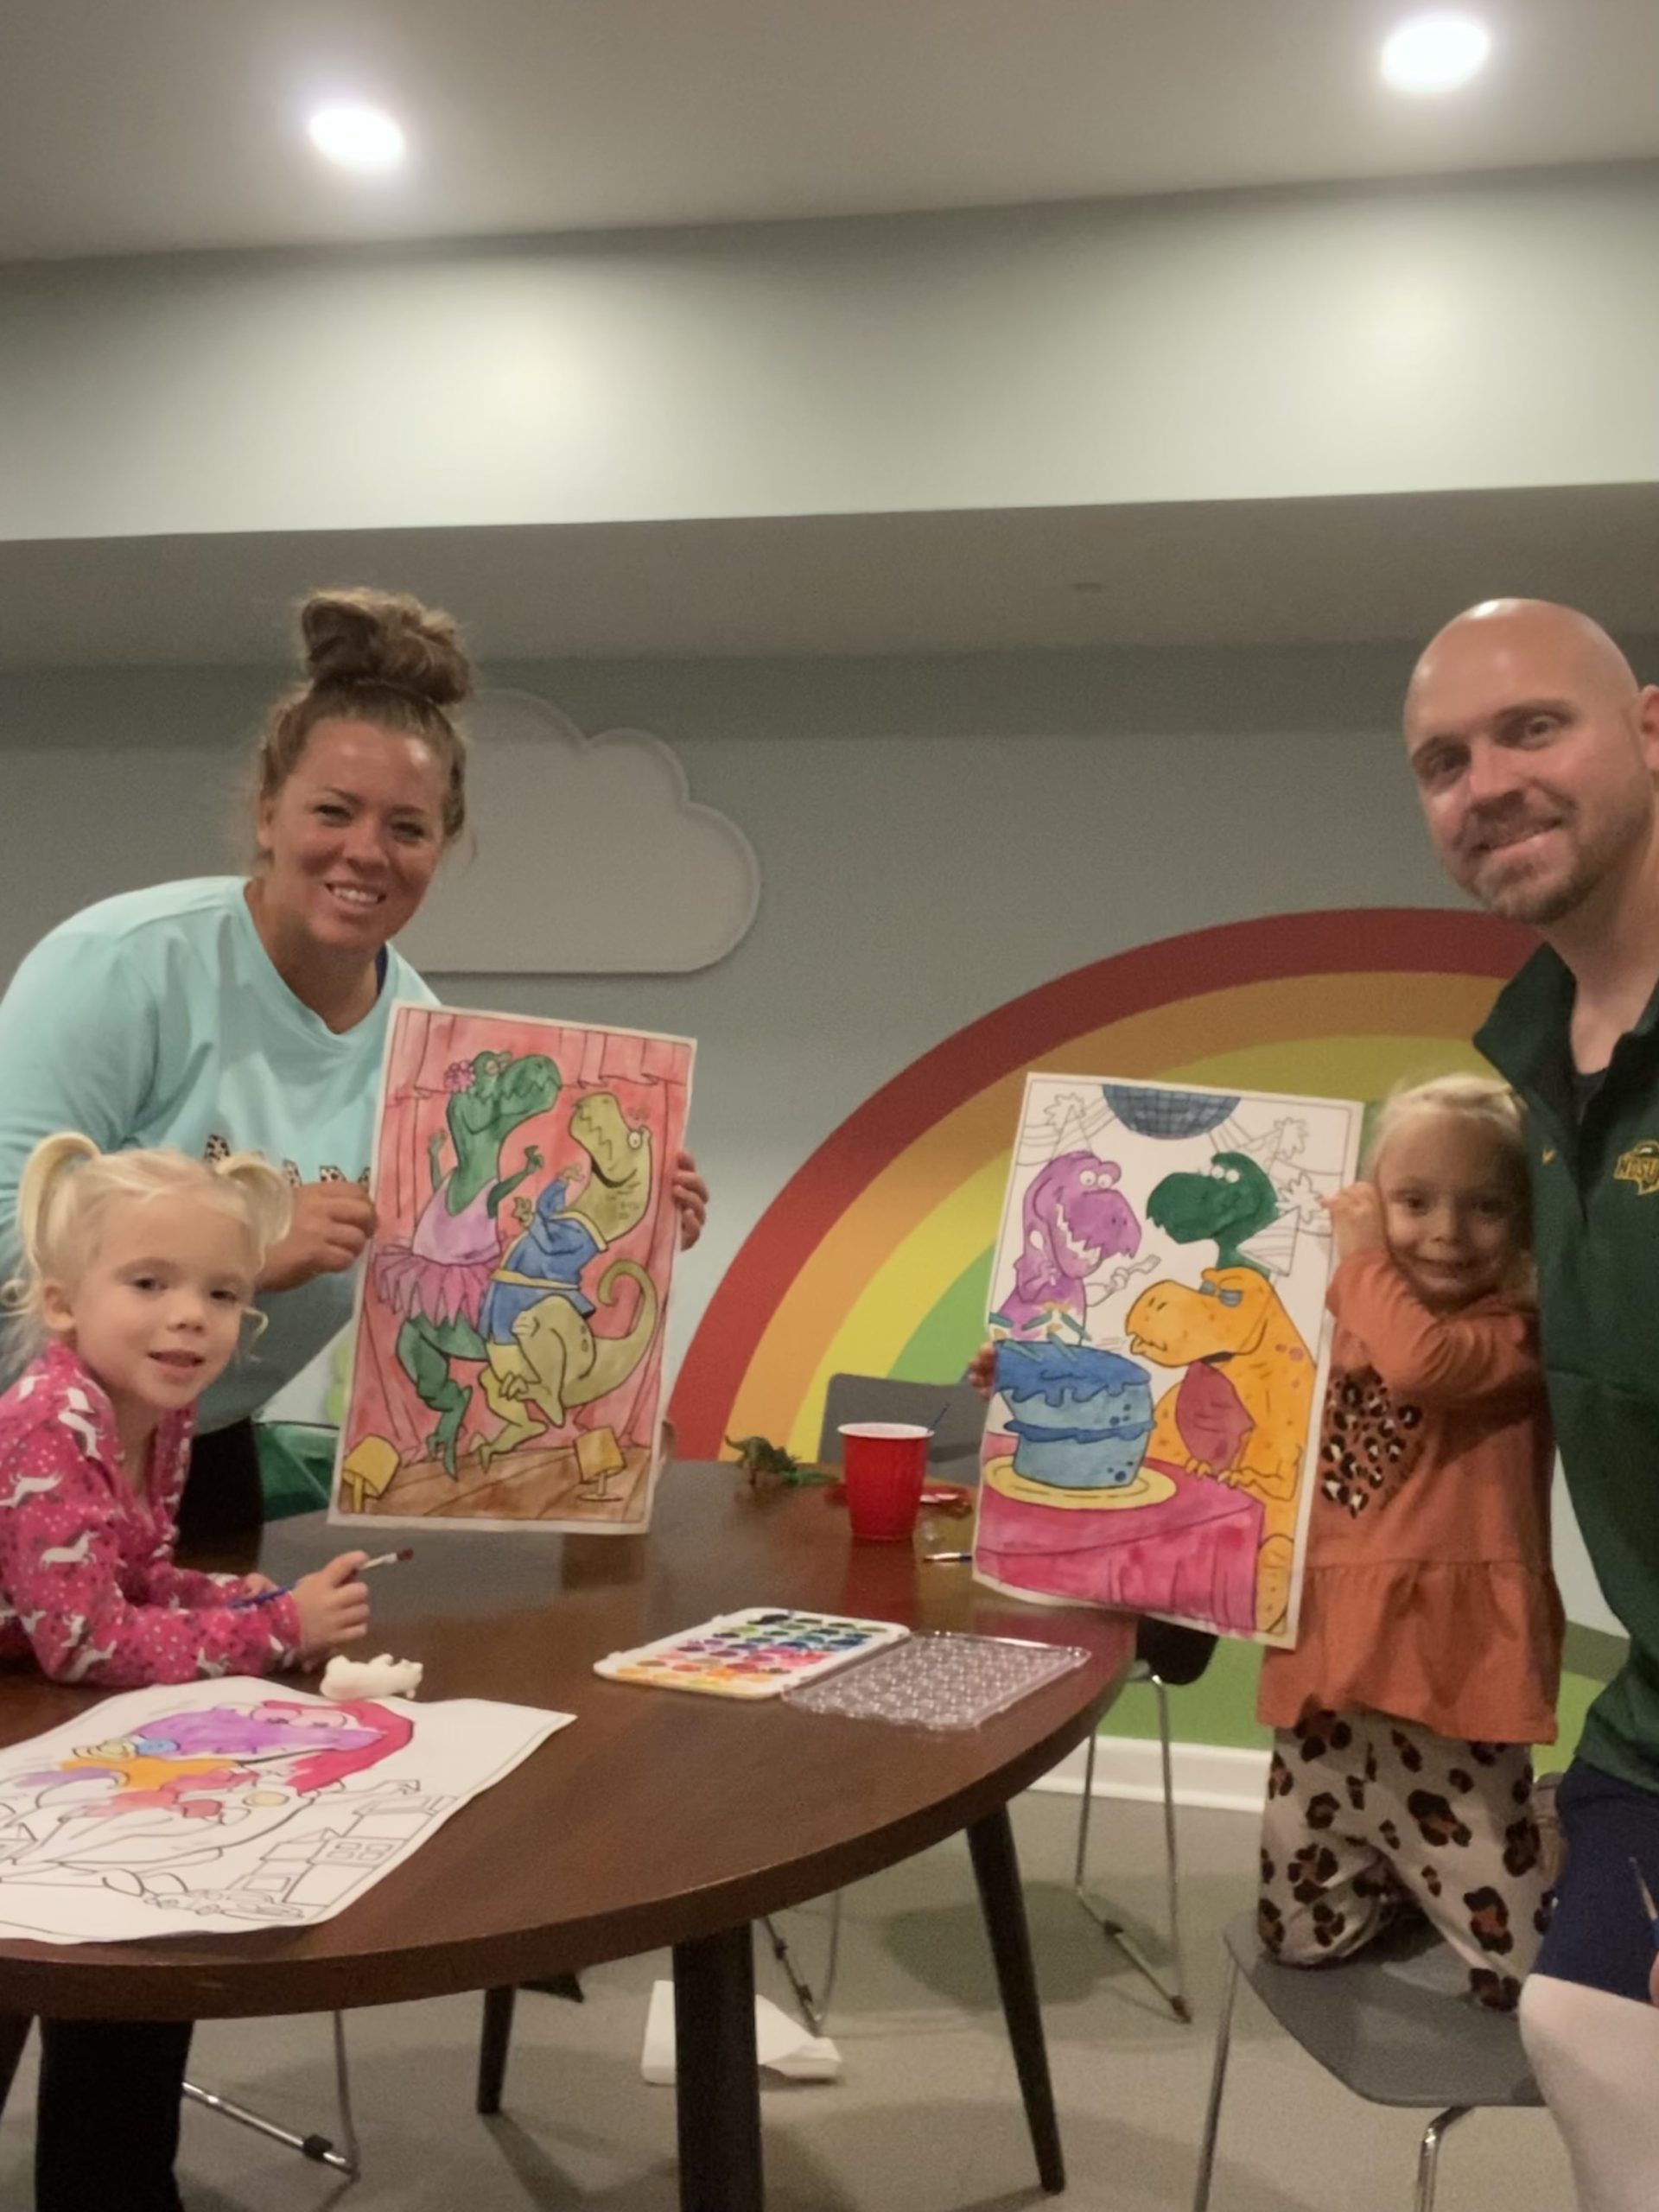 Sawyer, Alison, Remi, and Brandon pose holding some paintings they created in the Ronald Mcdonald House playroom